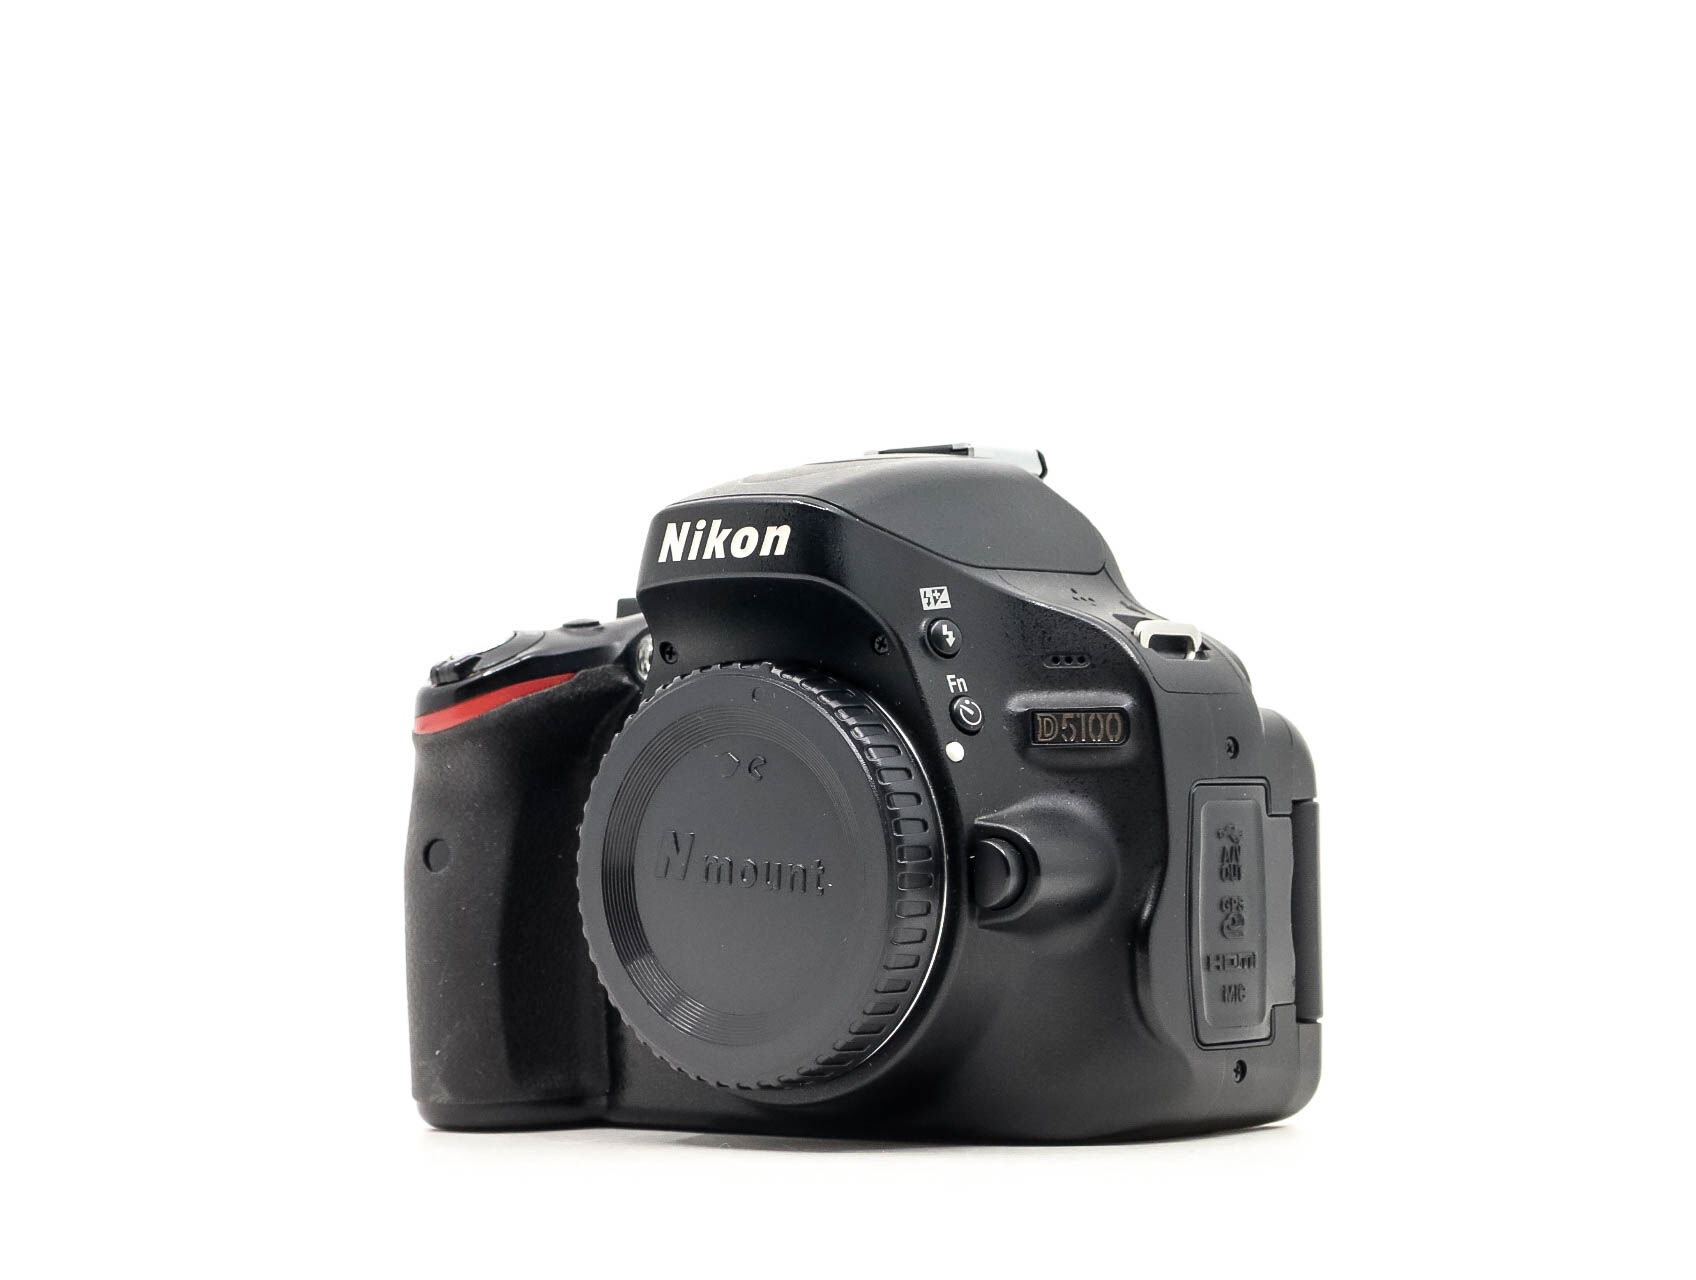 Nikon D5100 (Condition: Well Used)